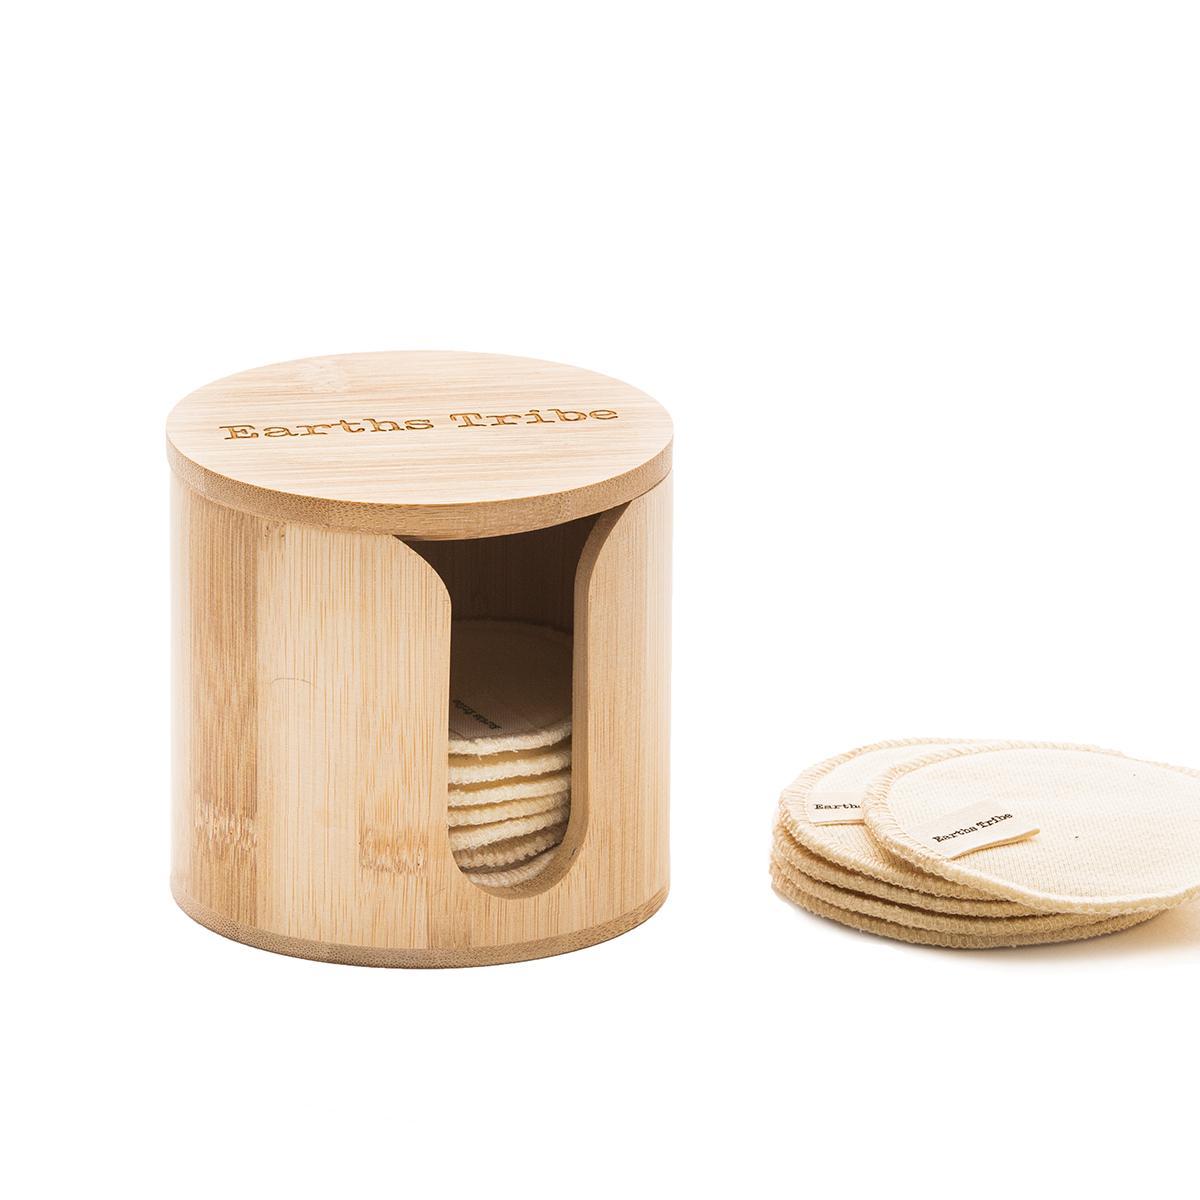 Earths Tribe | Bamboo Makeup Round Holder